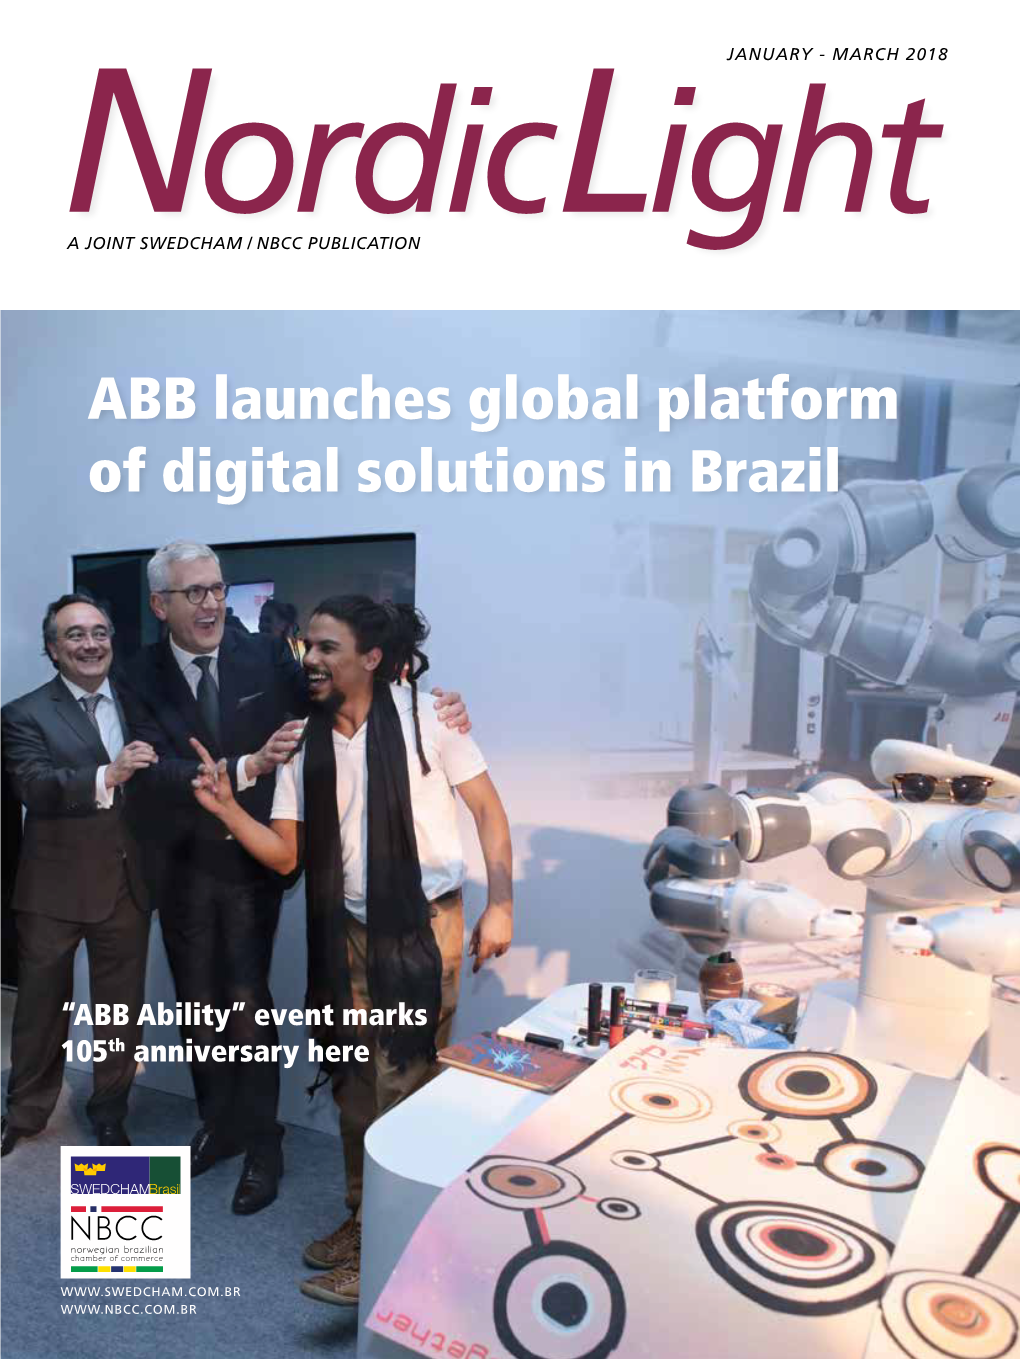 ABB Launches Global Platform of Digital Solutions in Brazil